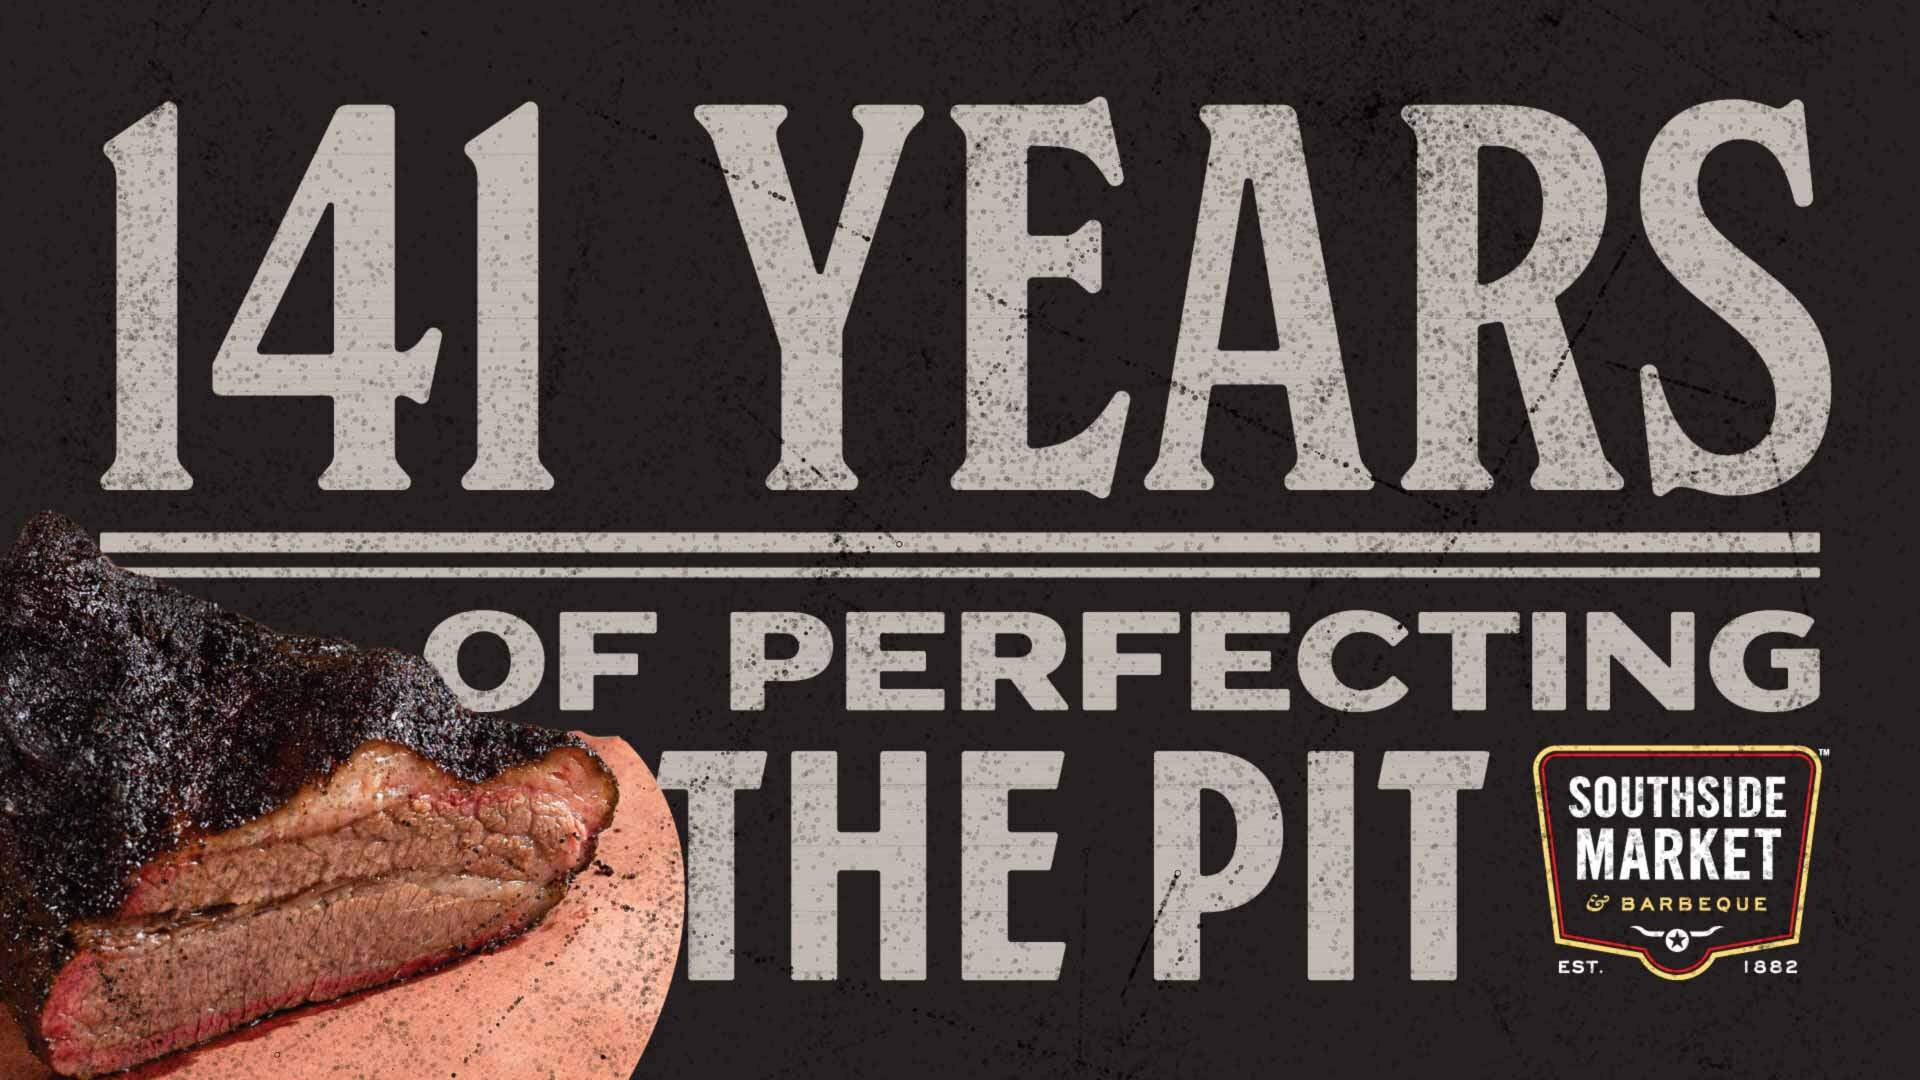 Key graphic design example as part of the brand update of Southside Market & Barbeque which reads "141 YEARS OF PERFECTING THE PIT"